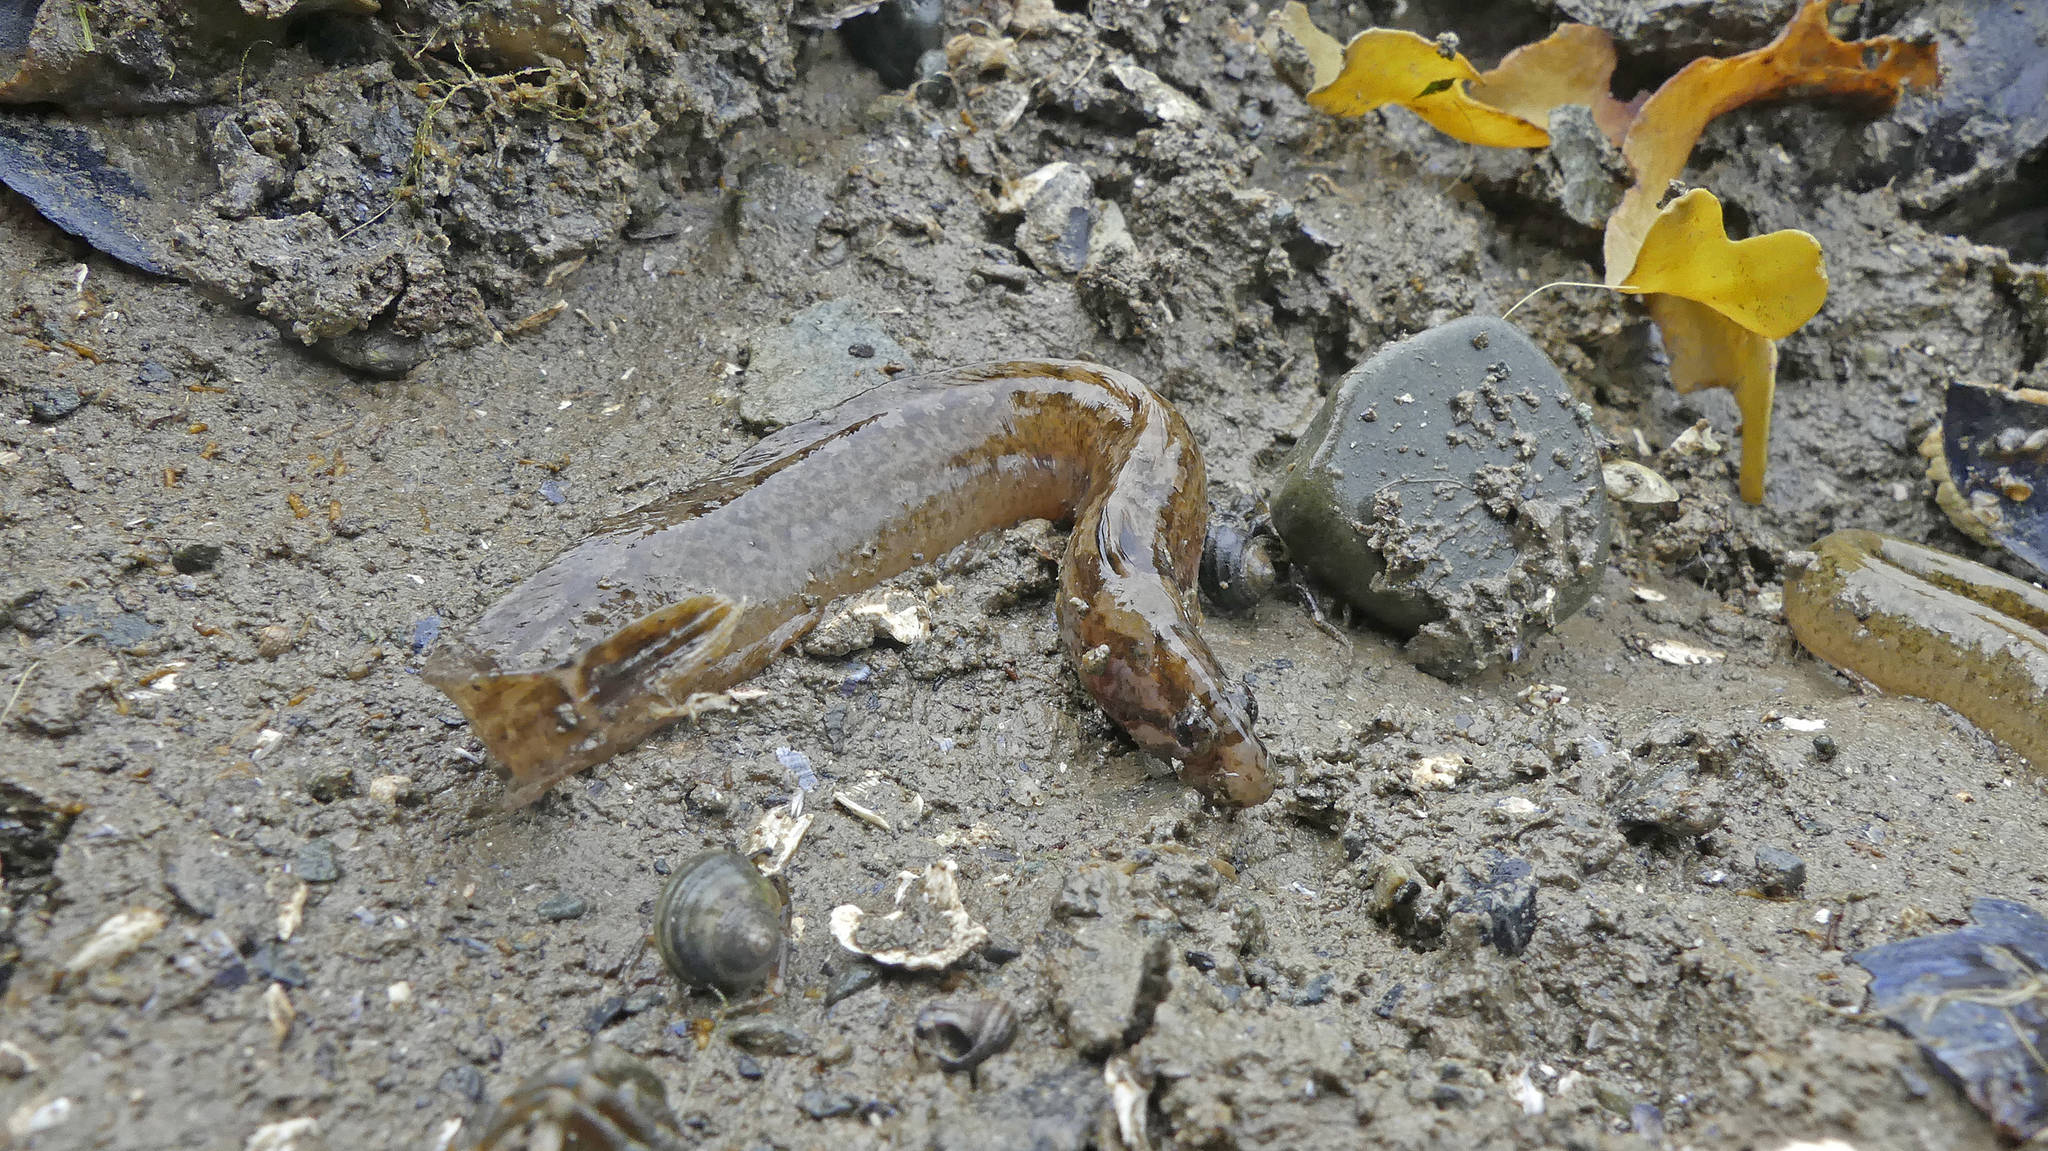 A high cockscomb prickleback lies on the sand; the head is toward the right. (Courtesy Photo / Bob Armstrong)